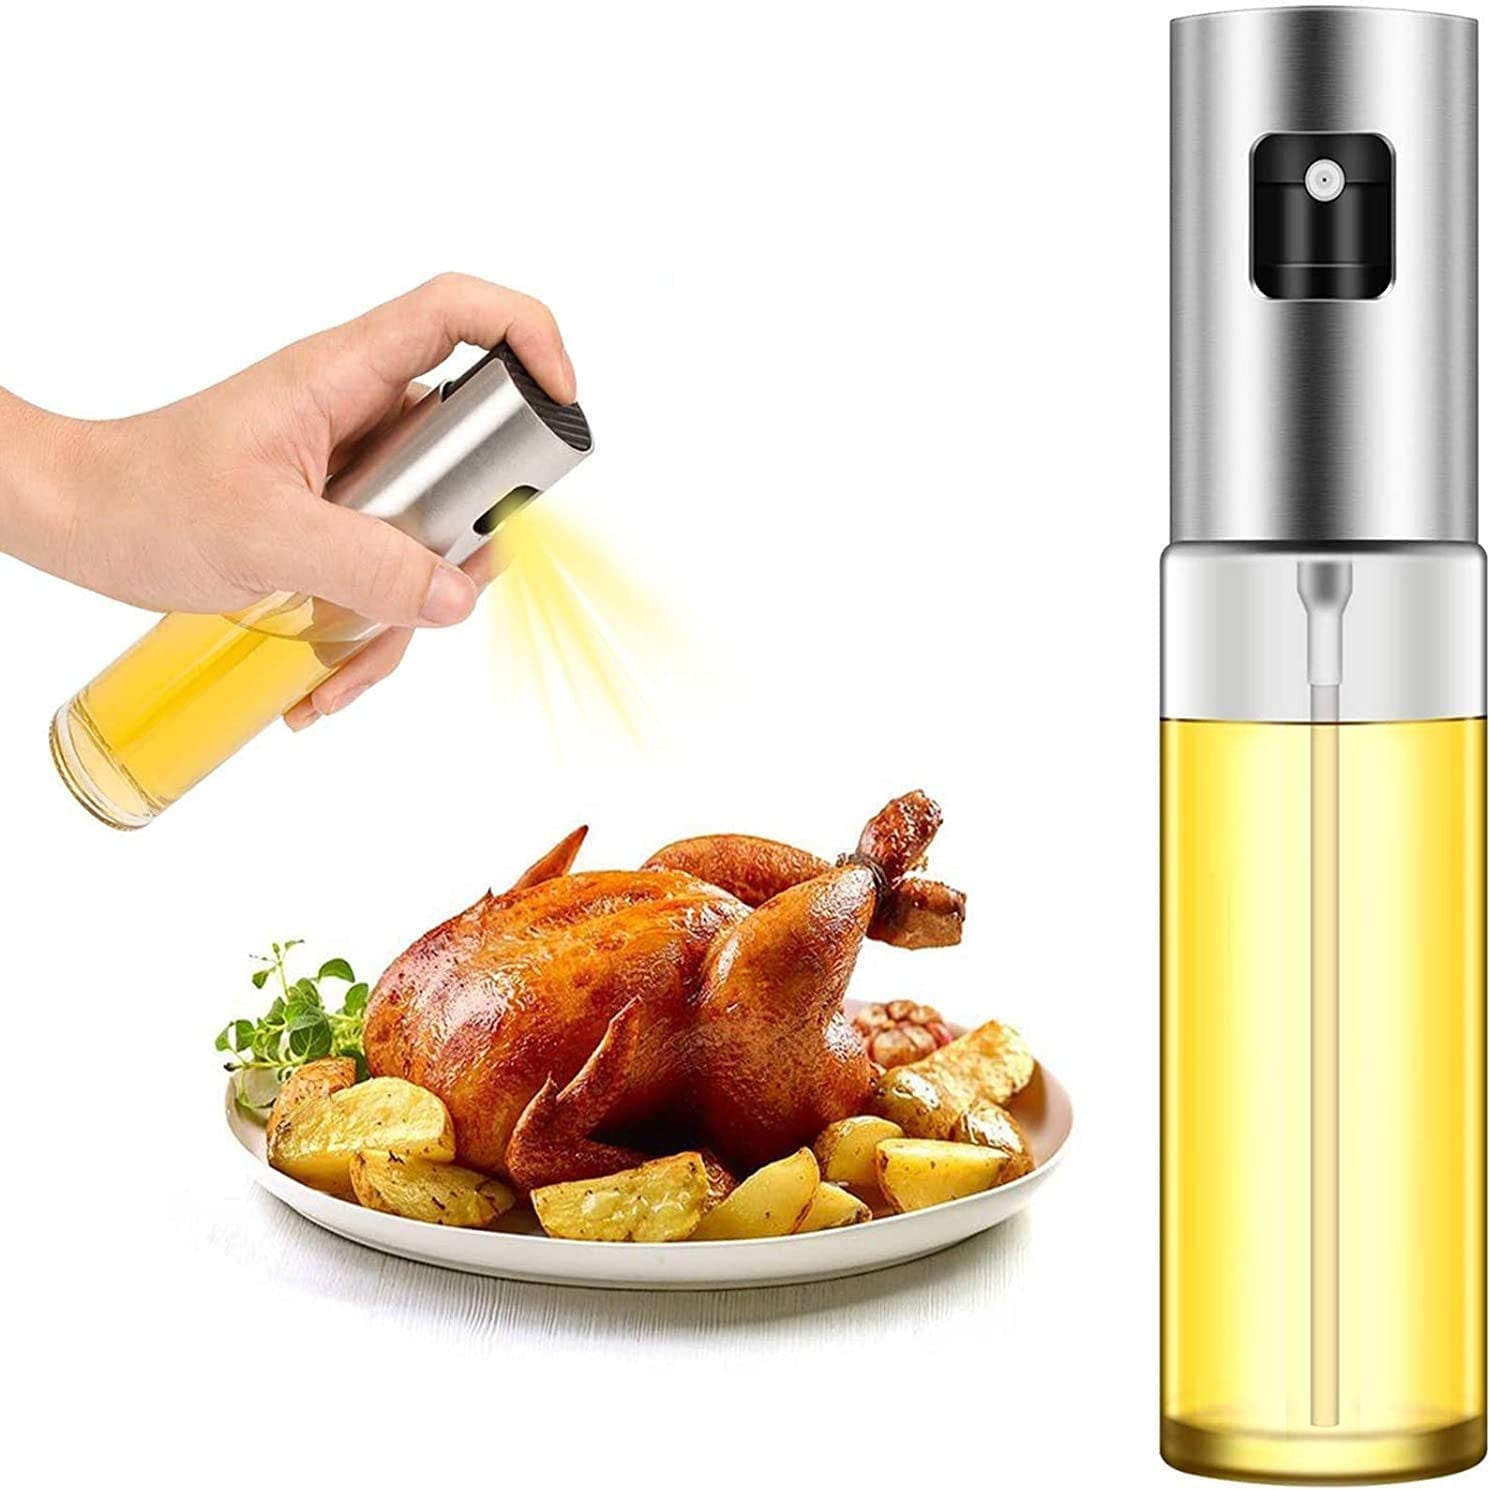 CBGGQ Olive Oil Sprayer, Oil Spray for Cooking, BBQ Cooking Spray Bottle, 7  oz / 210 ml Oil Sprayer Bottle, for Kitchen, Cooking, BBQ, Baking